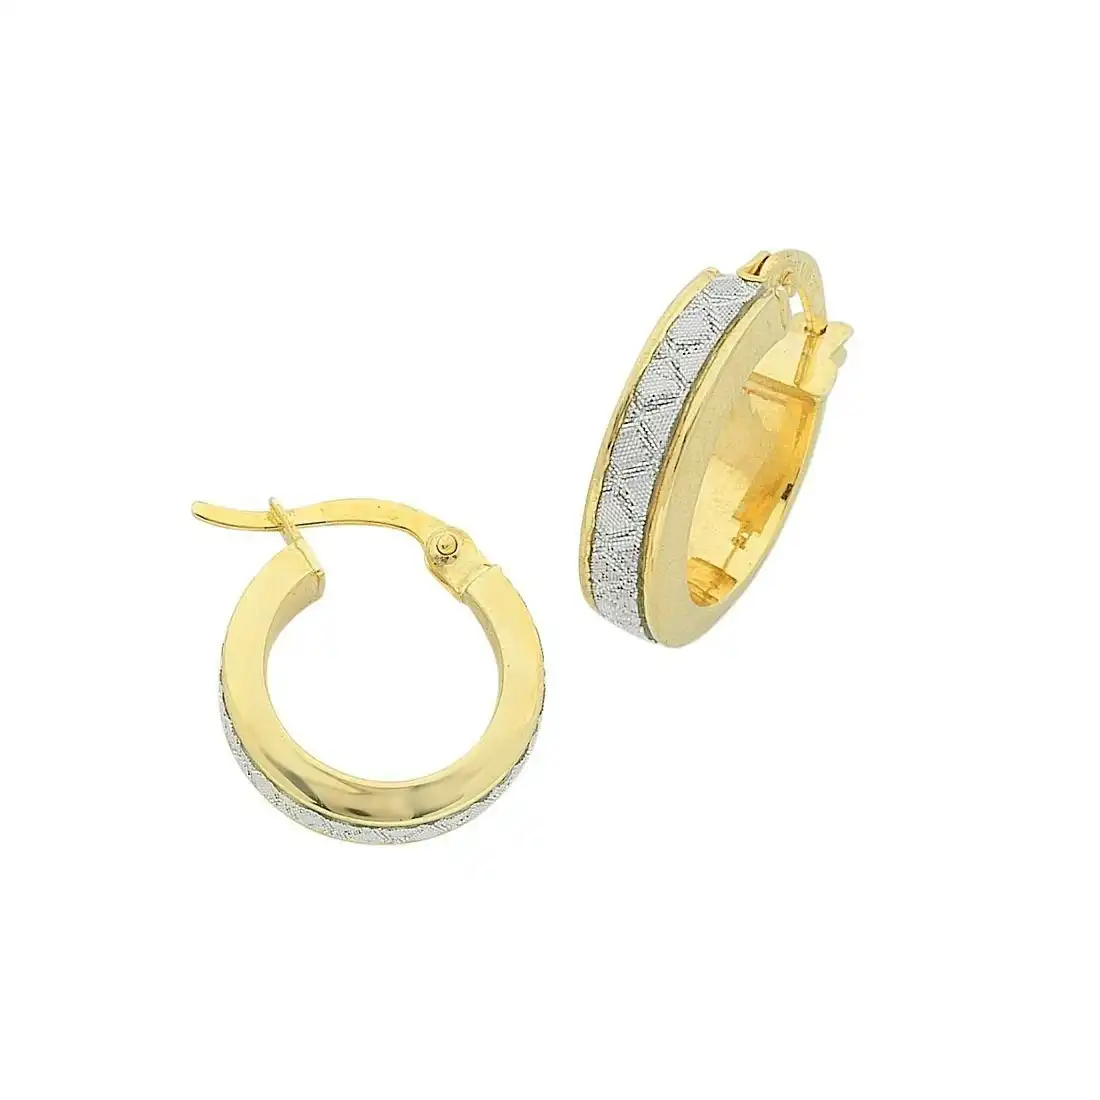 9ct Yellow Gold Silver Infused Stardust Criss Cross Hoop Earrings